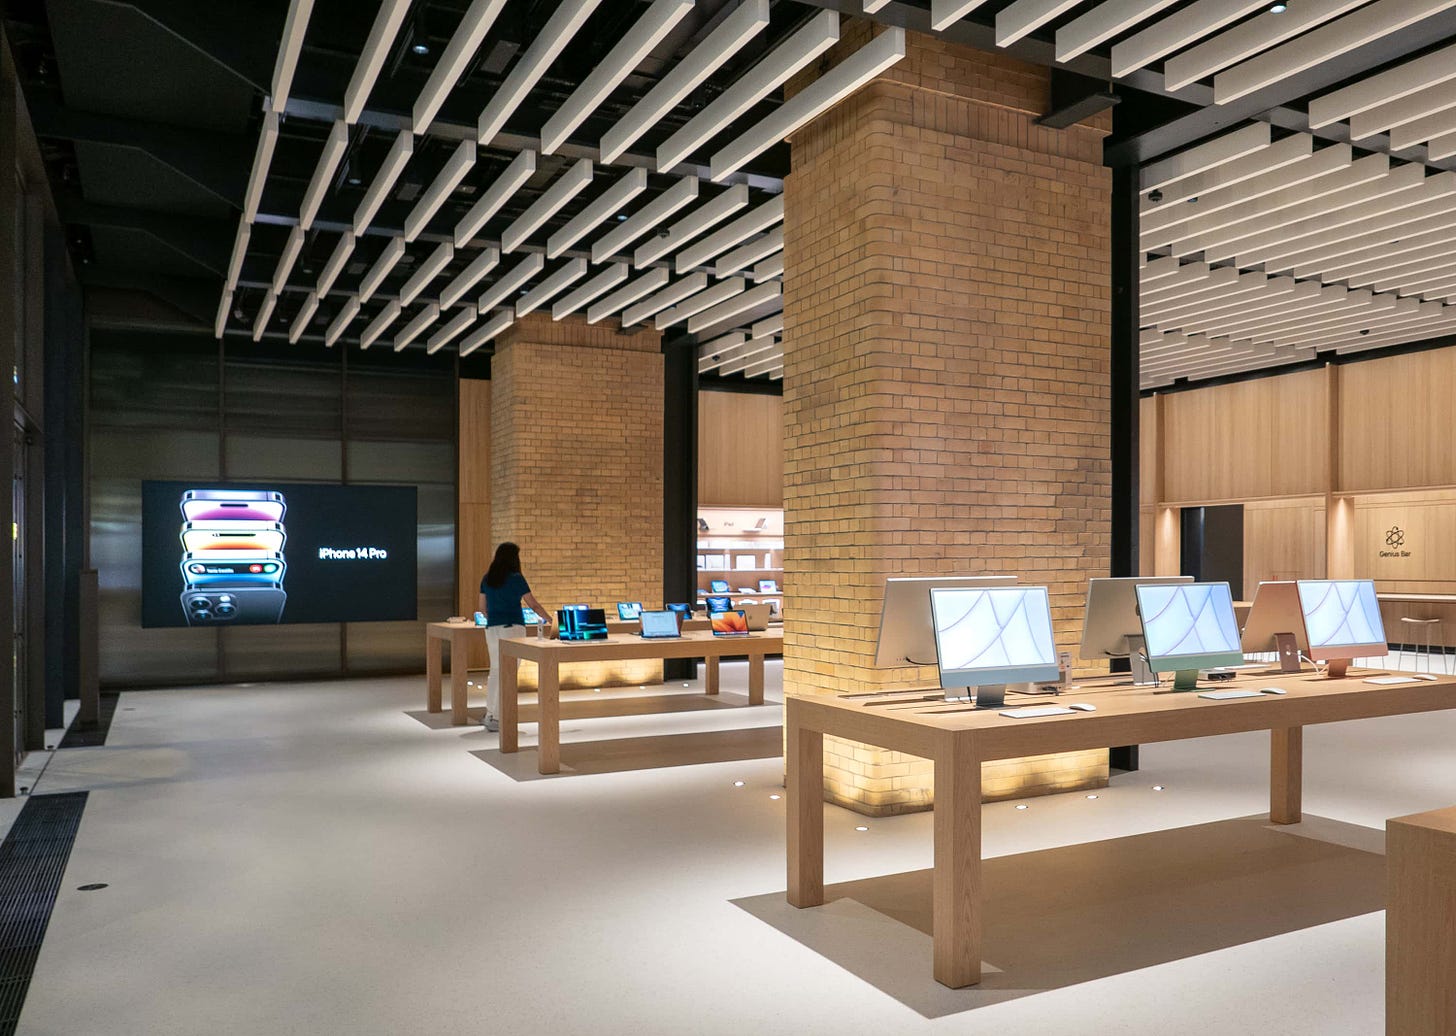 The interior of Apple Battersea at the front of the store. Large brick columns and white oak tables appear in the foreground.